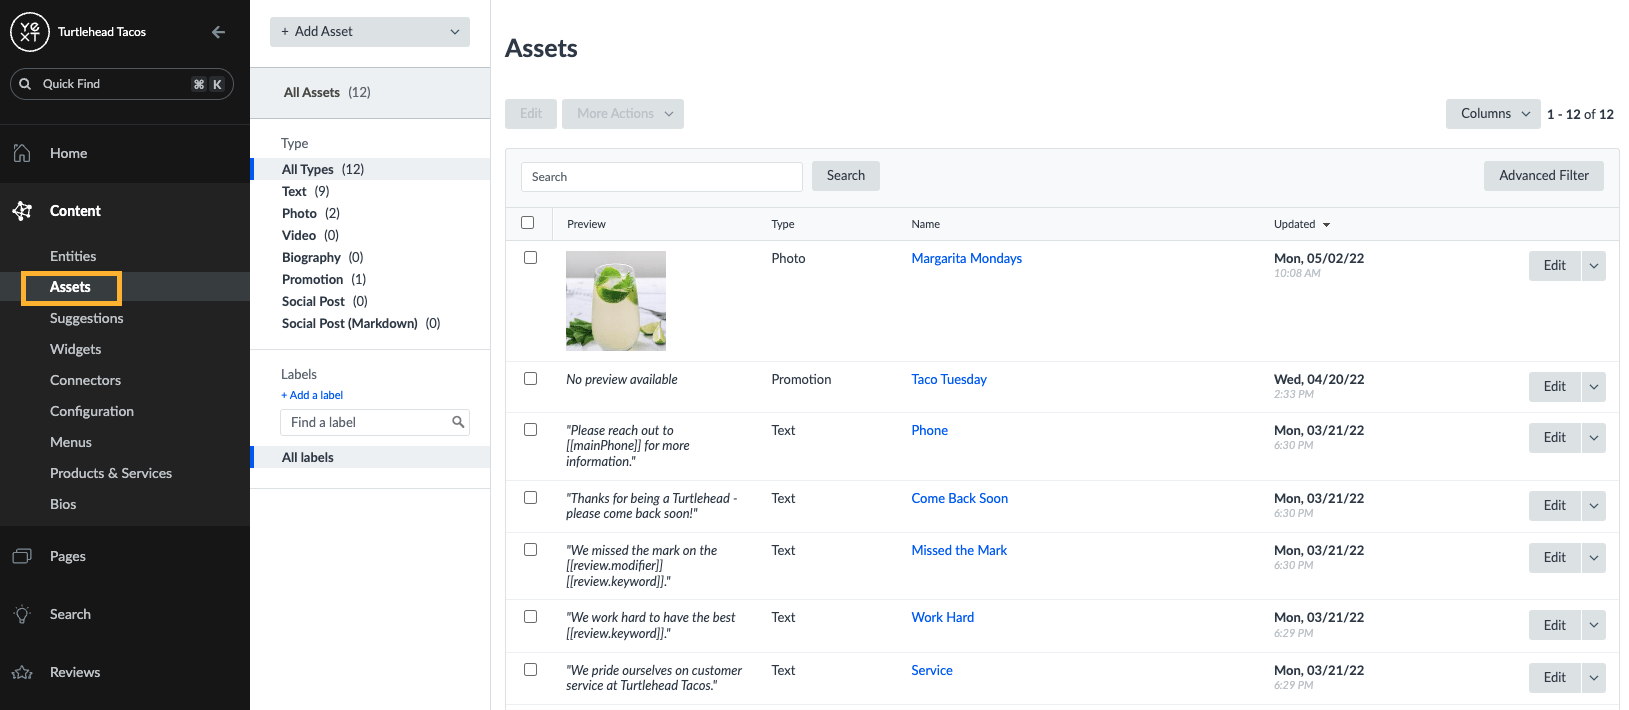 Assets are shared content stored in Yext under Content